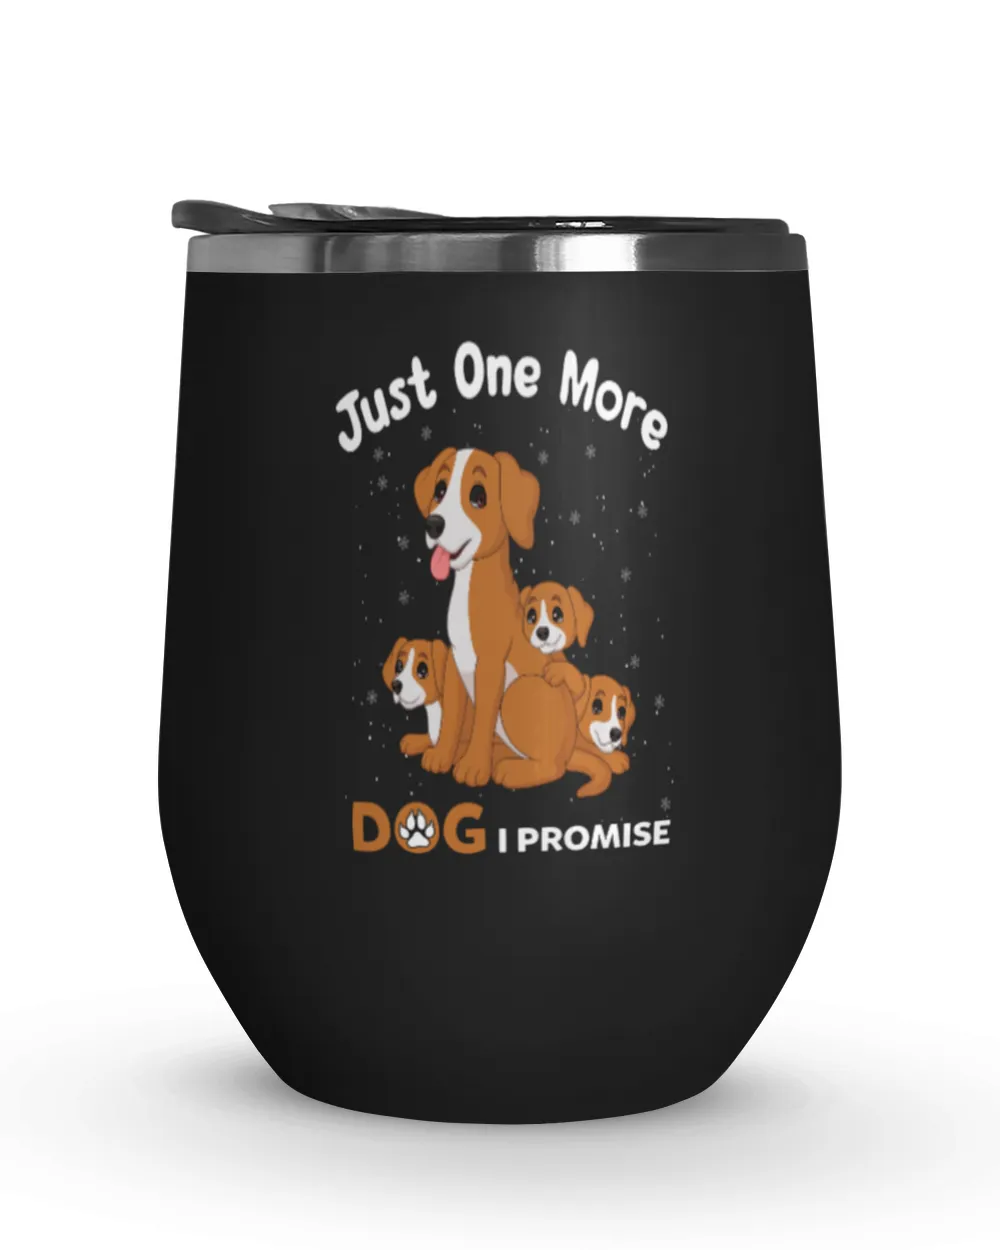 Just One More Dog I Promise Personalized Grandpa Grandma Mom Sister For Dog Lovers